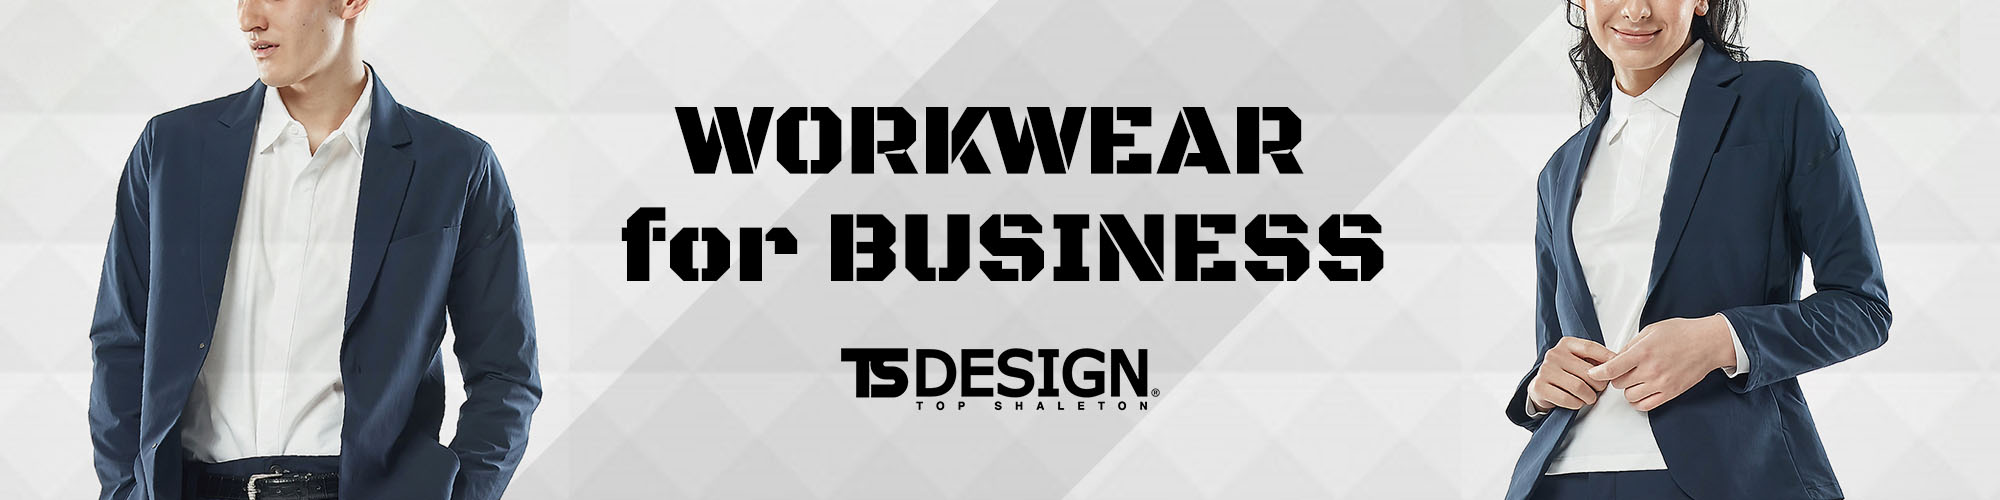 WORKWEAR for BUSINESS